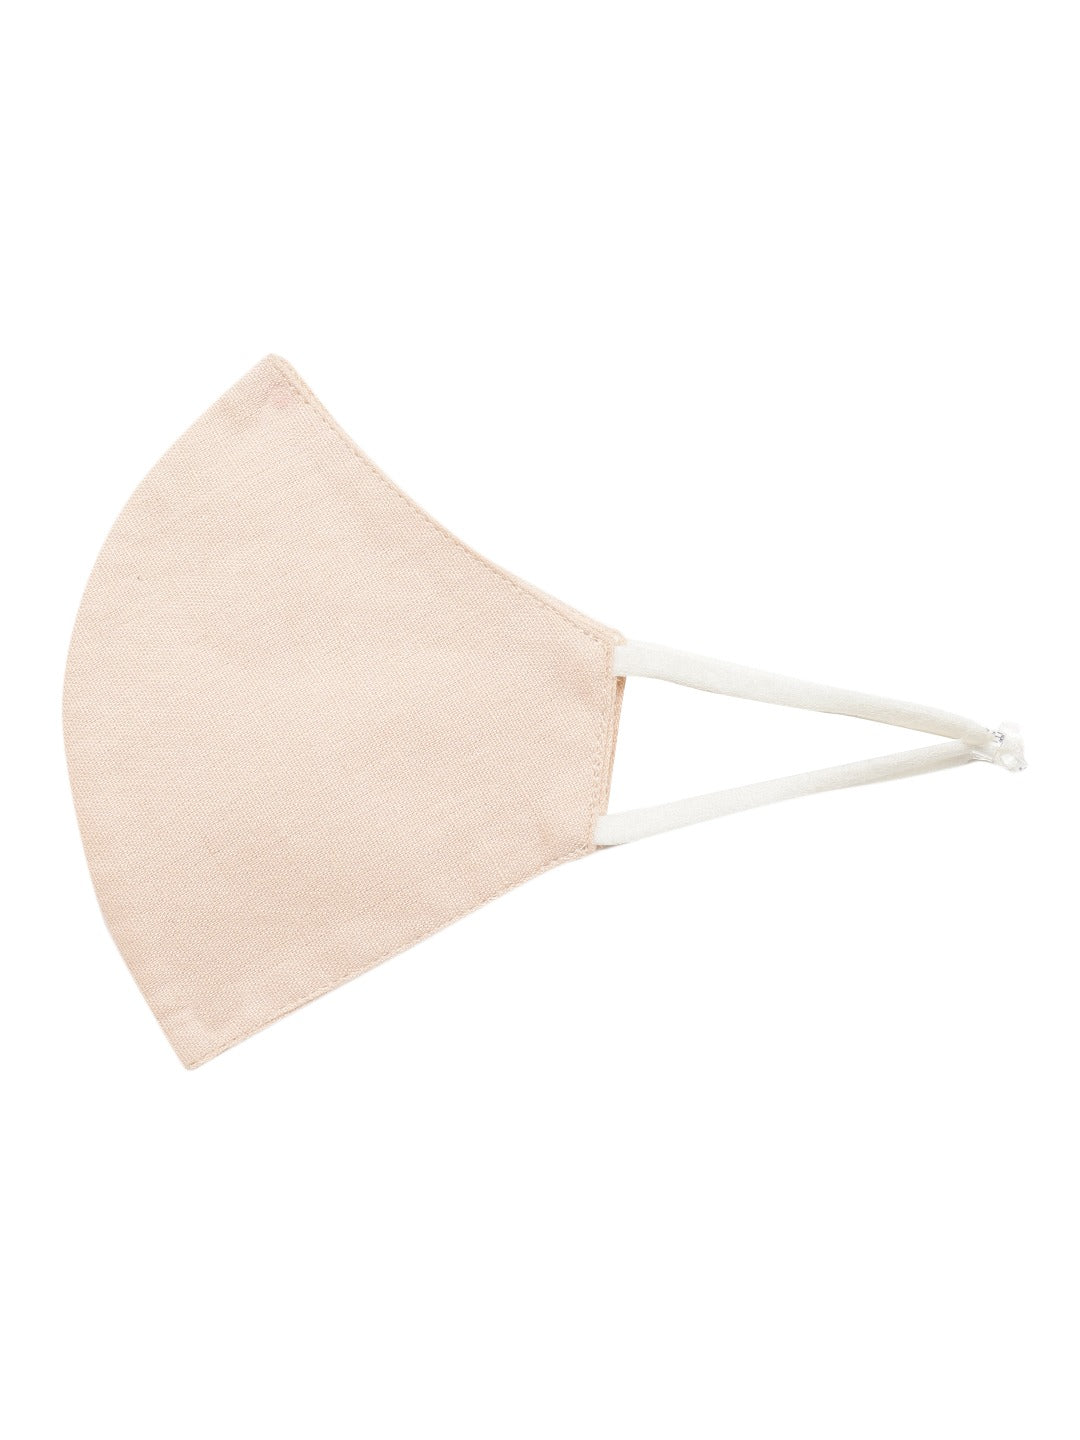 Blueberry Peach solid 2 ply cotton reusable chain mask